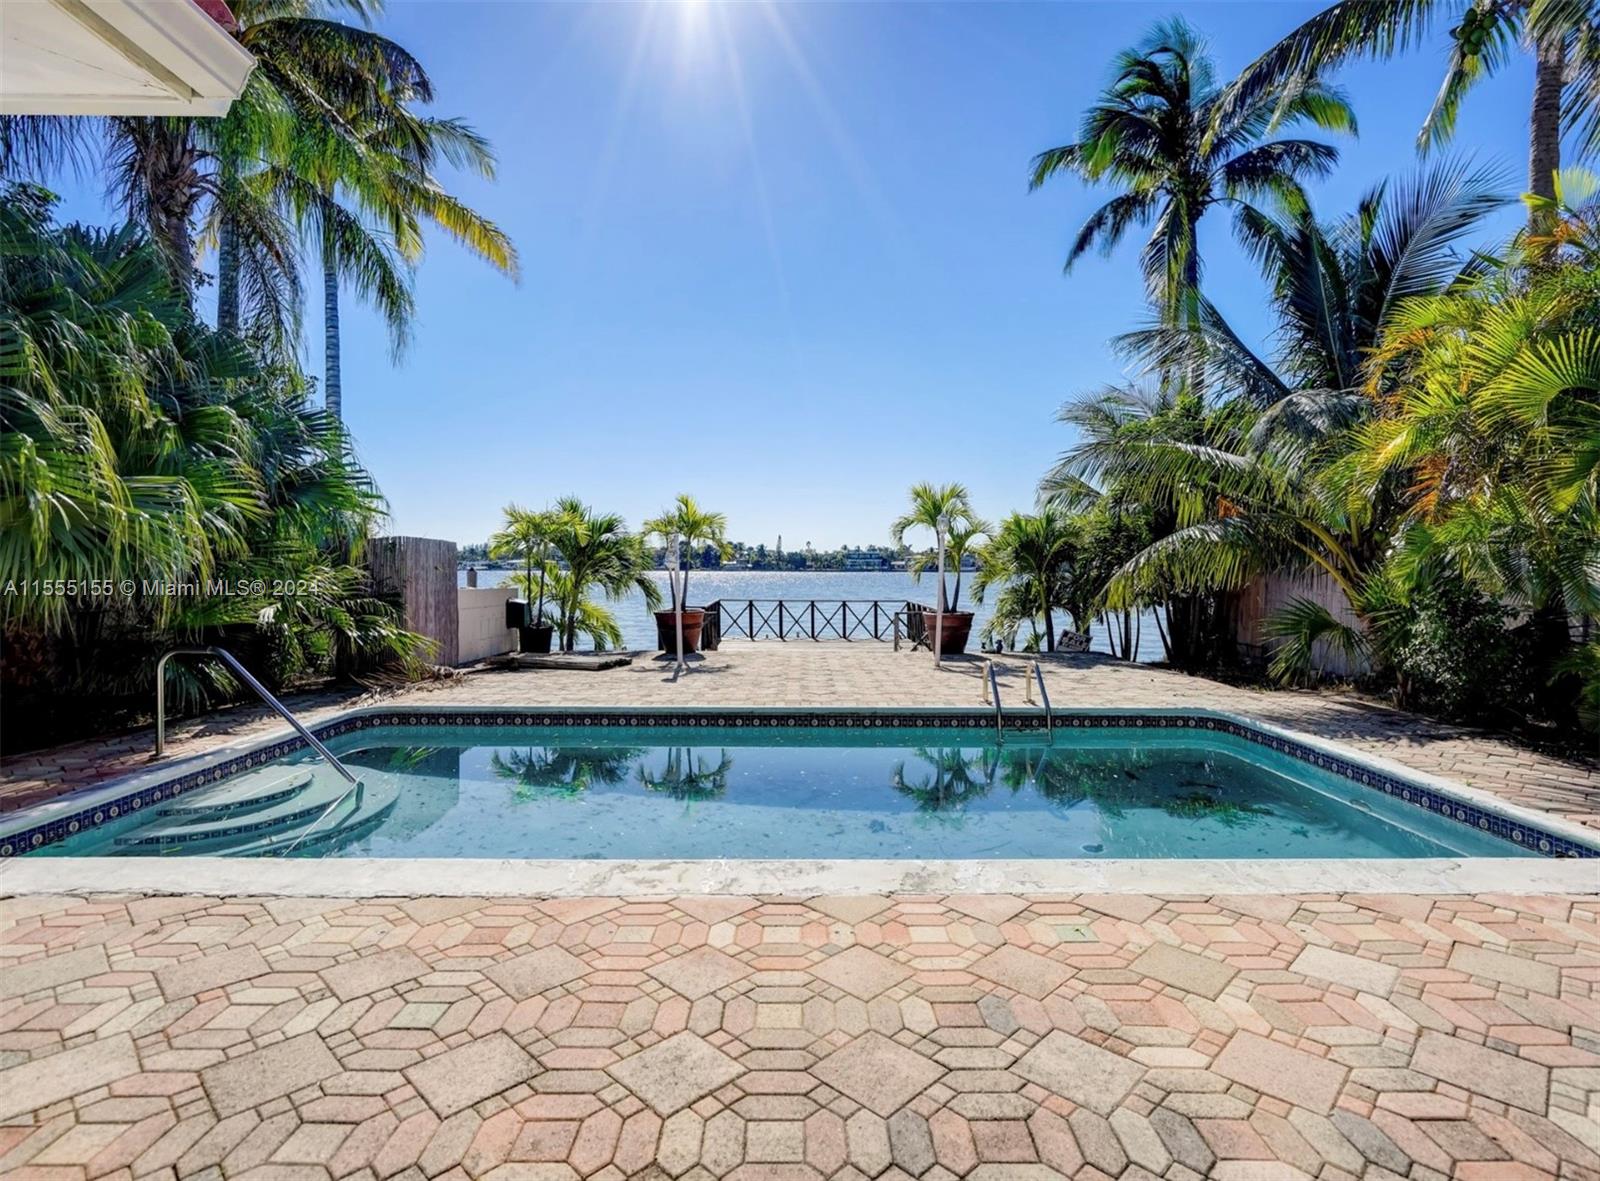 House for Rent in Miami Beach, FL